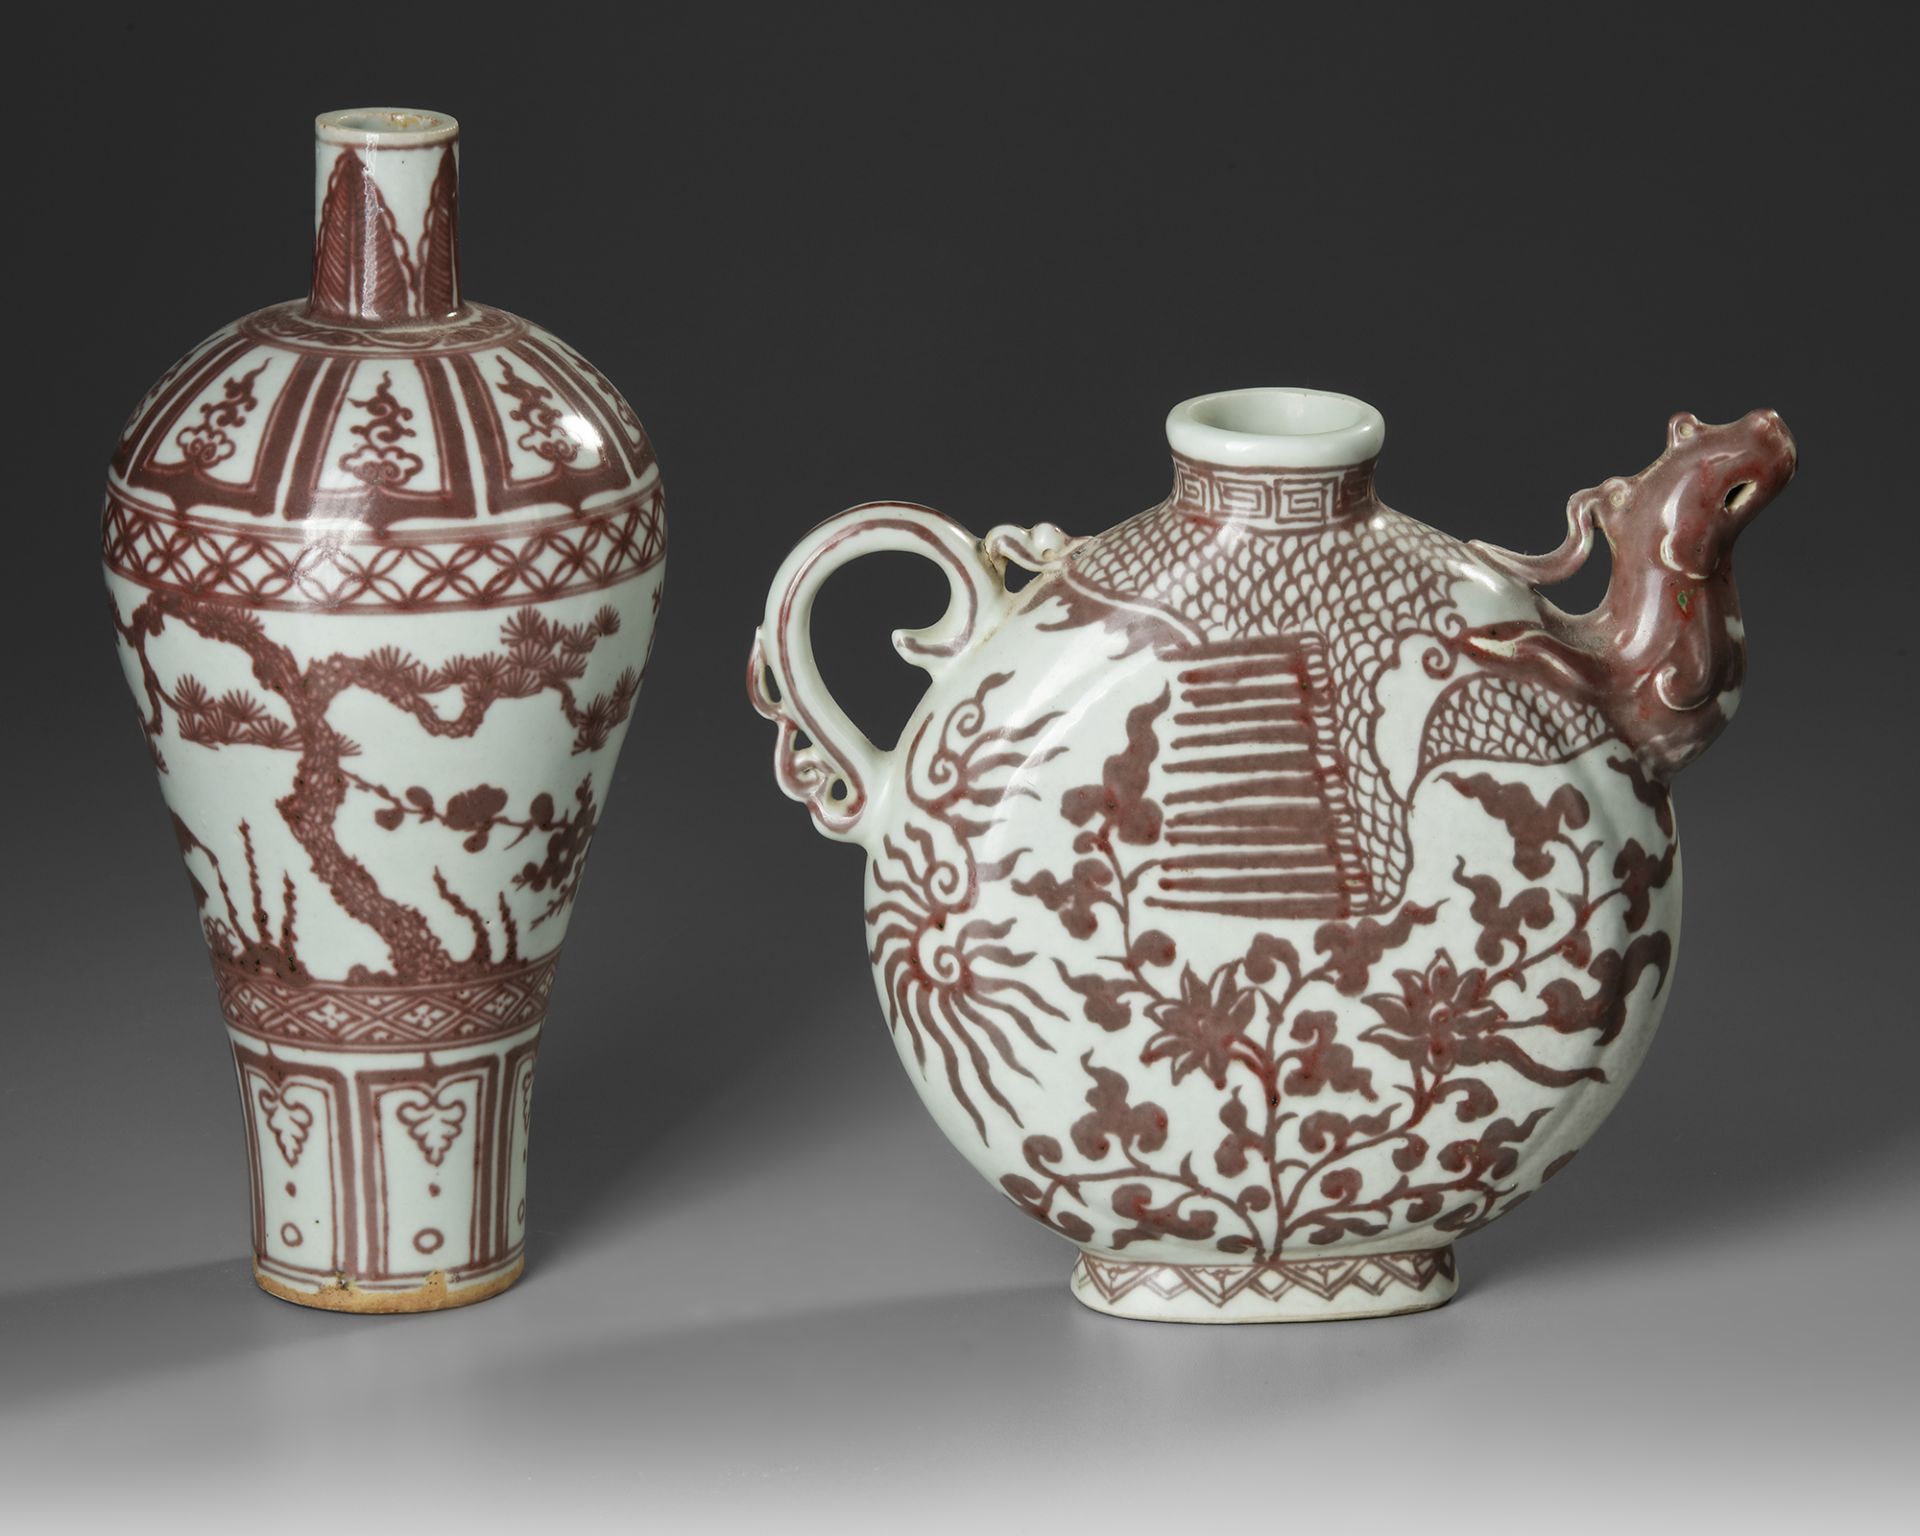 TWO CHINESE RED GLAZED VASES, 20TH CENTURY - Image 7 of 7